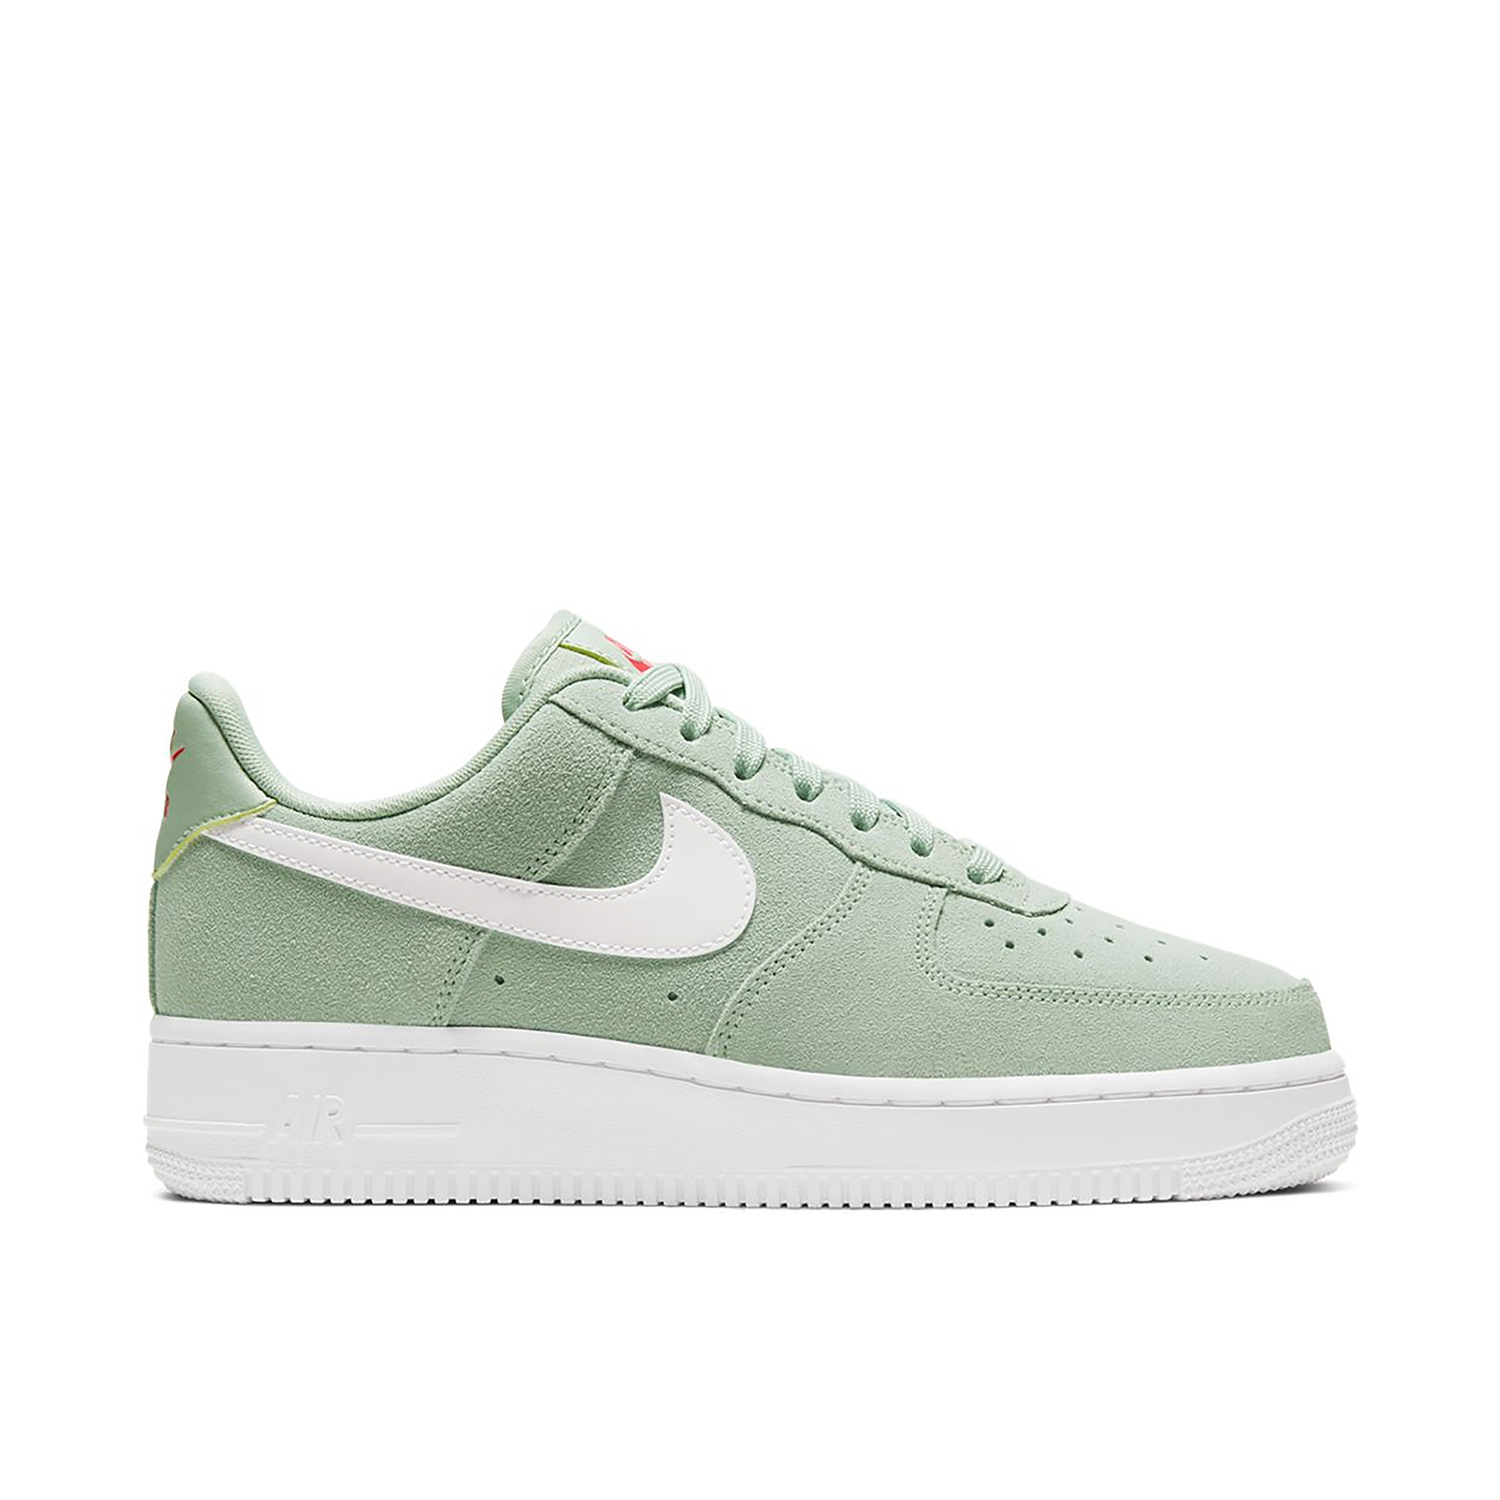 Nike Air Force 1 '07 LV8 in Green - Size 12